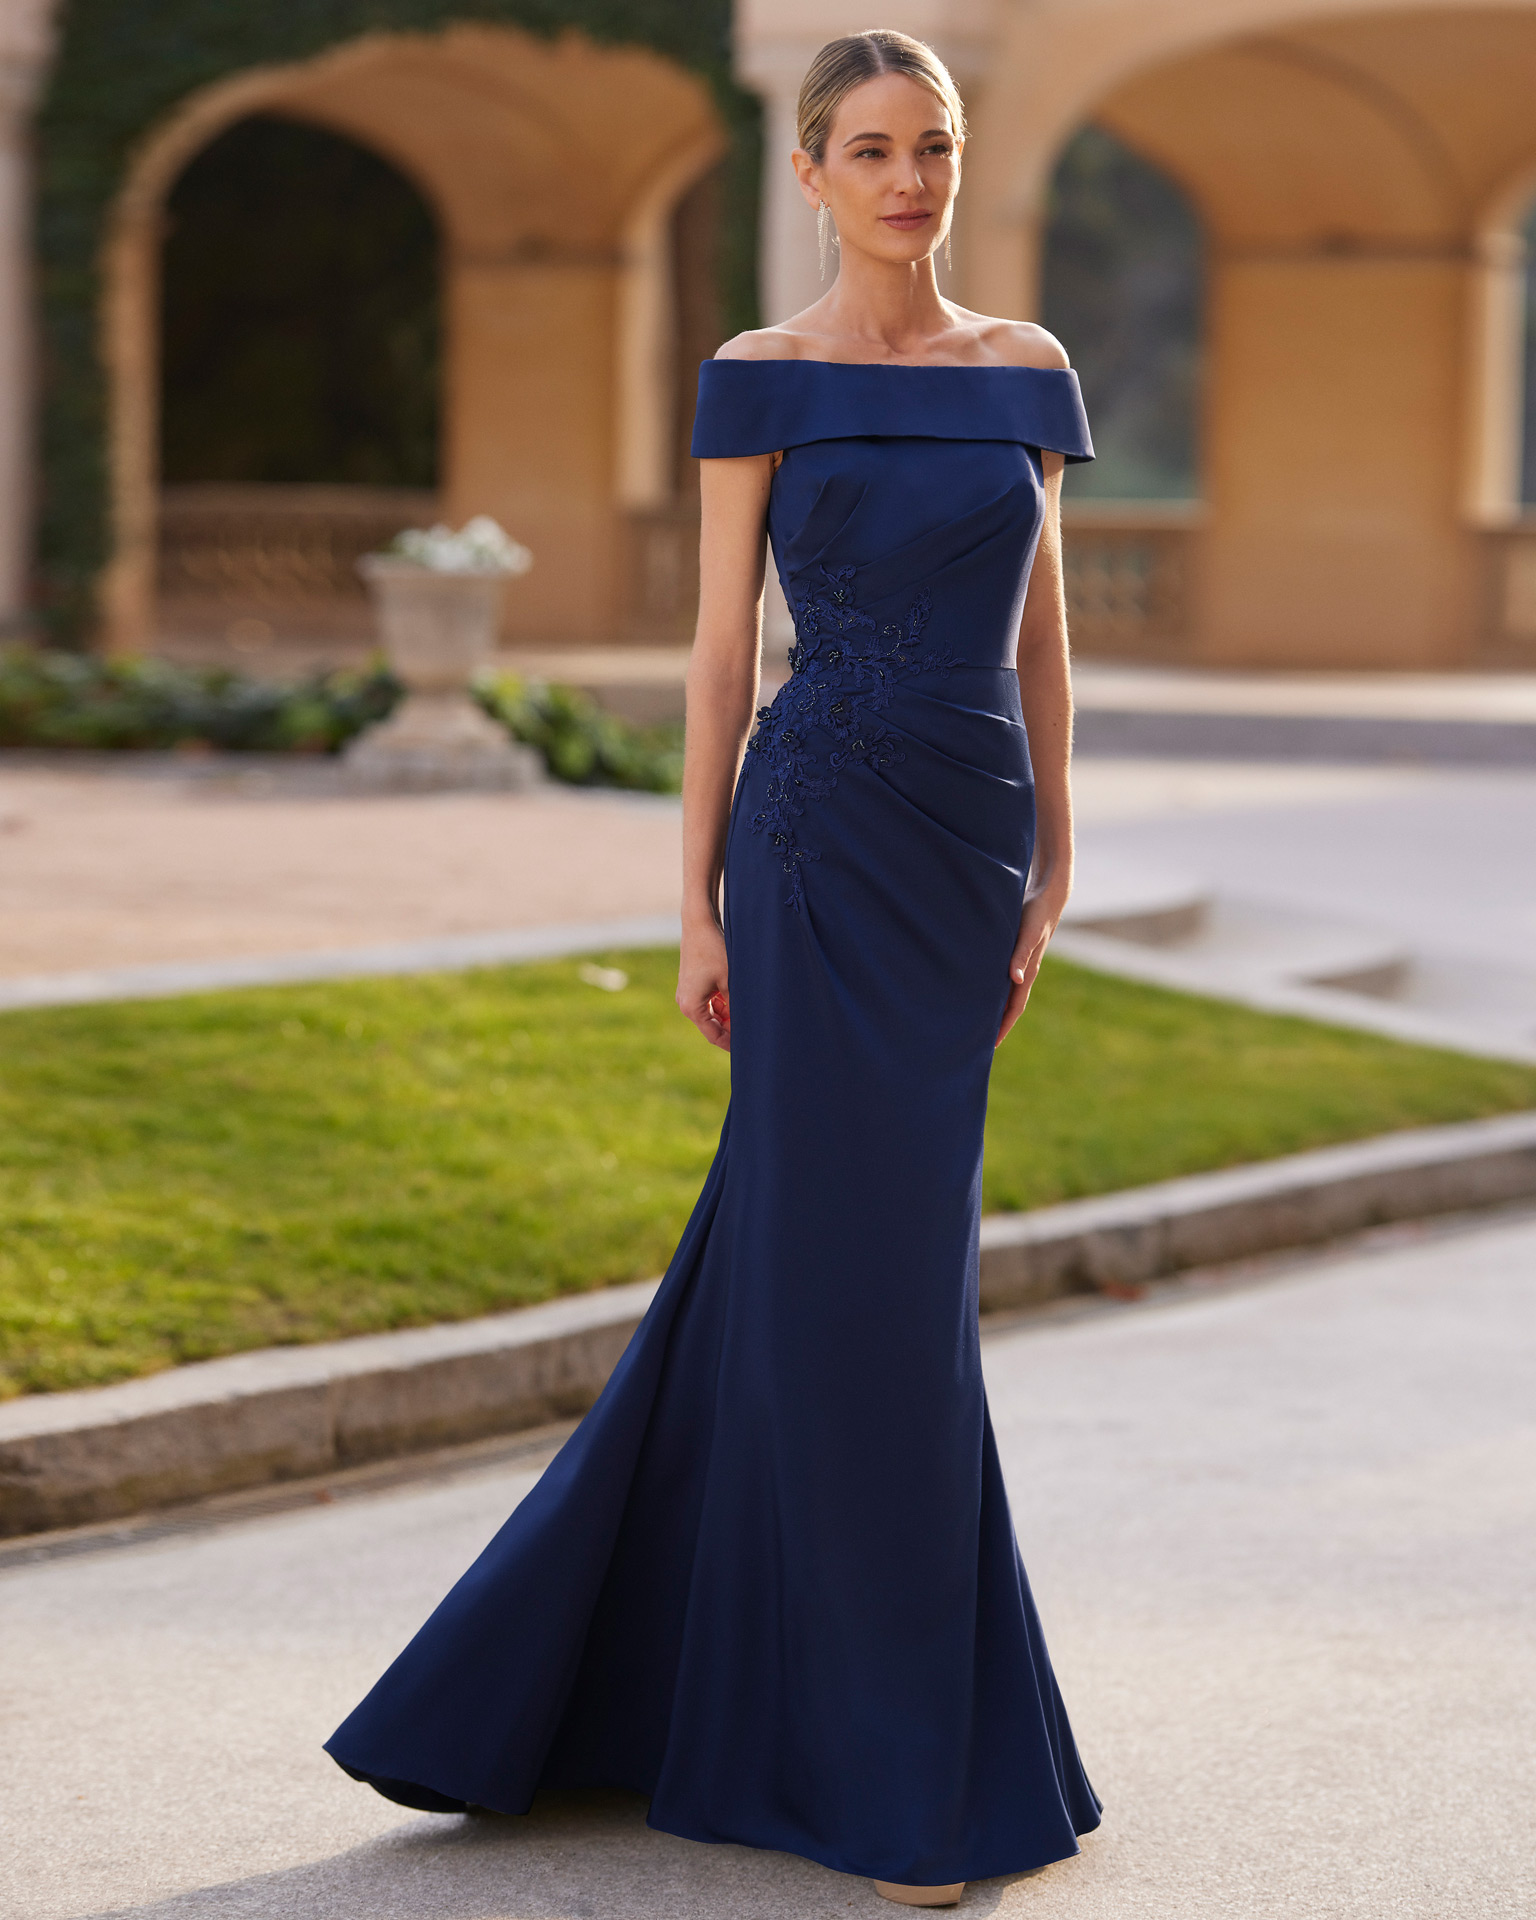 Simple long cocktail dress. Crafted in sateen crêpe with beadwork details. With off-the-shoulder neckline. Couture Club look. MARFIL_BARCELONA.